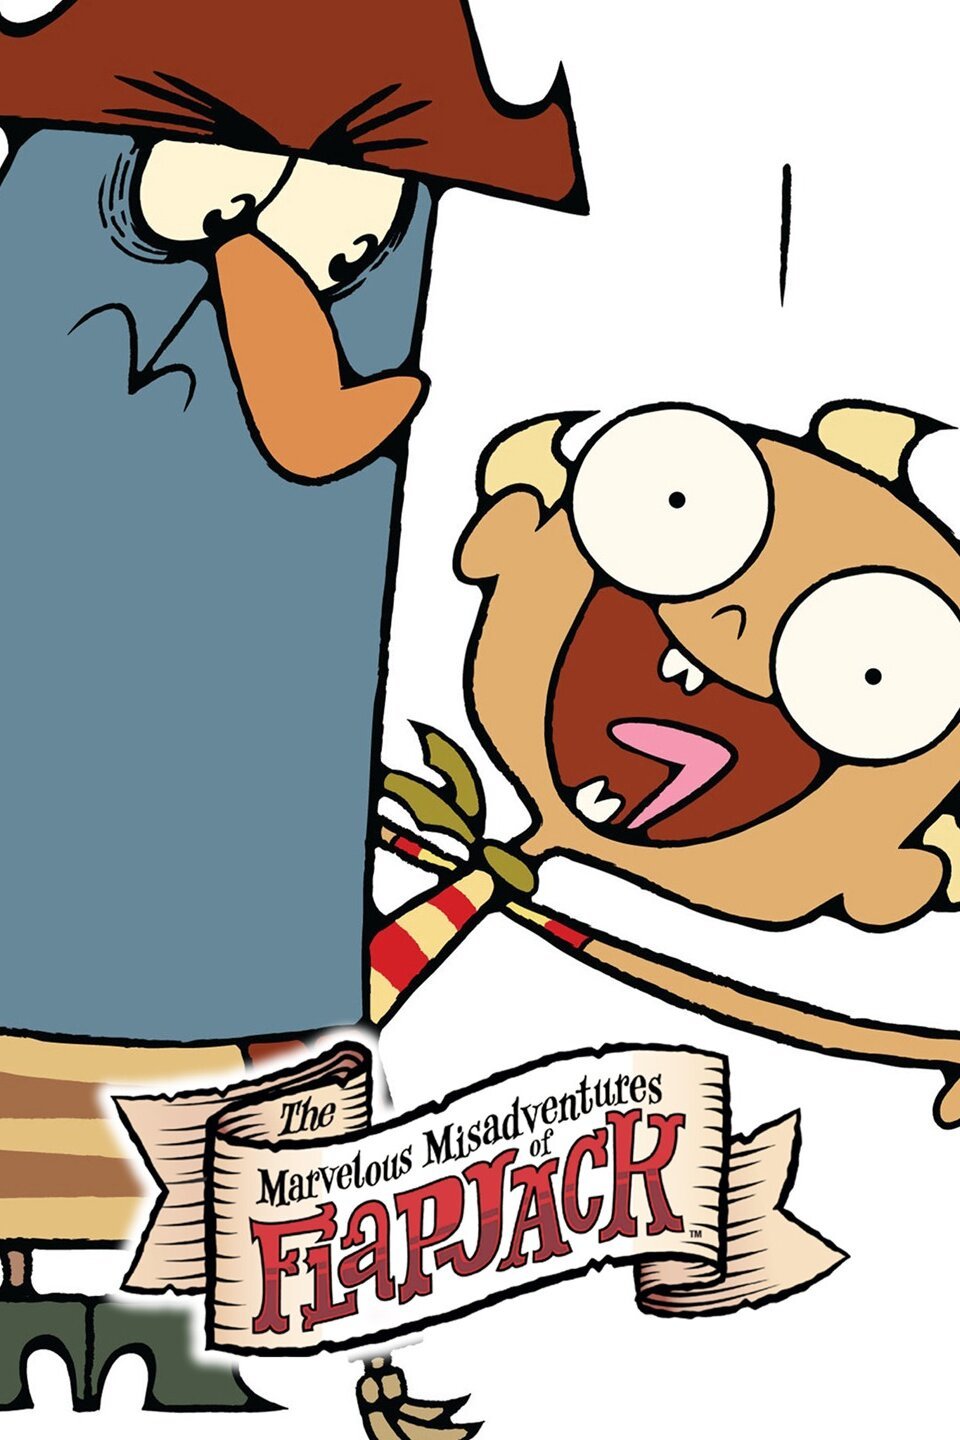 misadventures in dating flapjack dailymotion